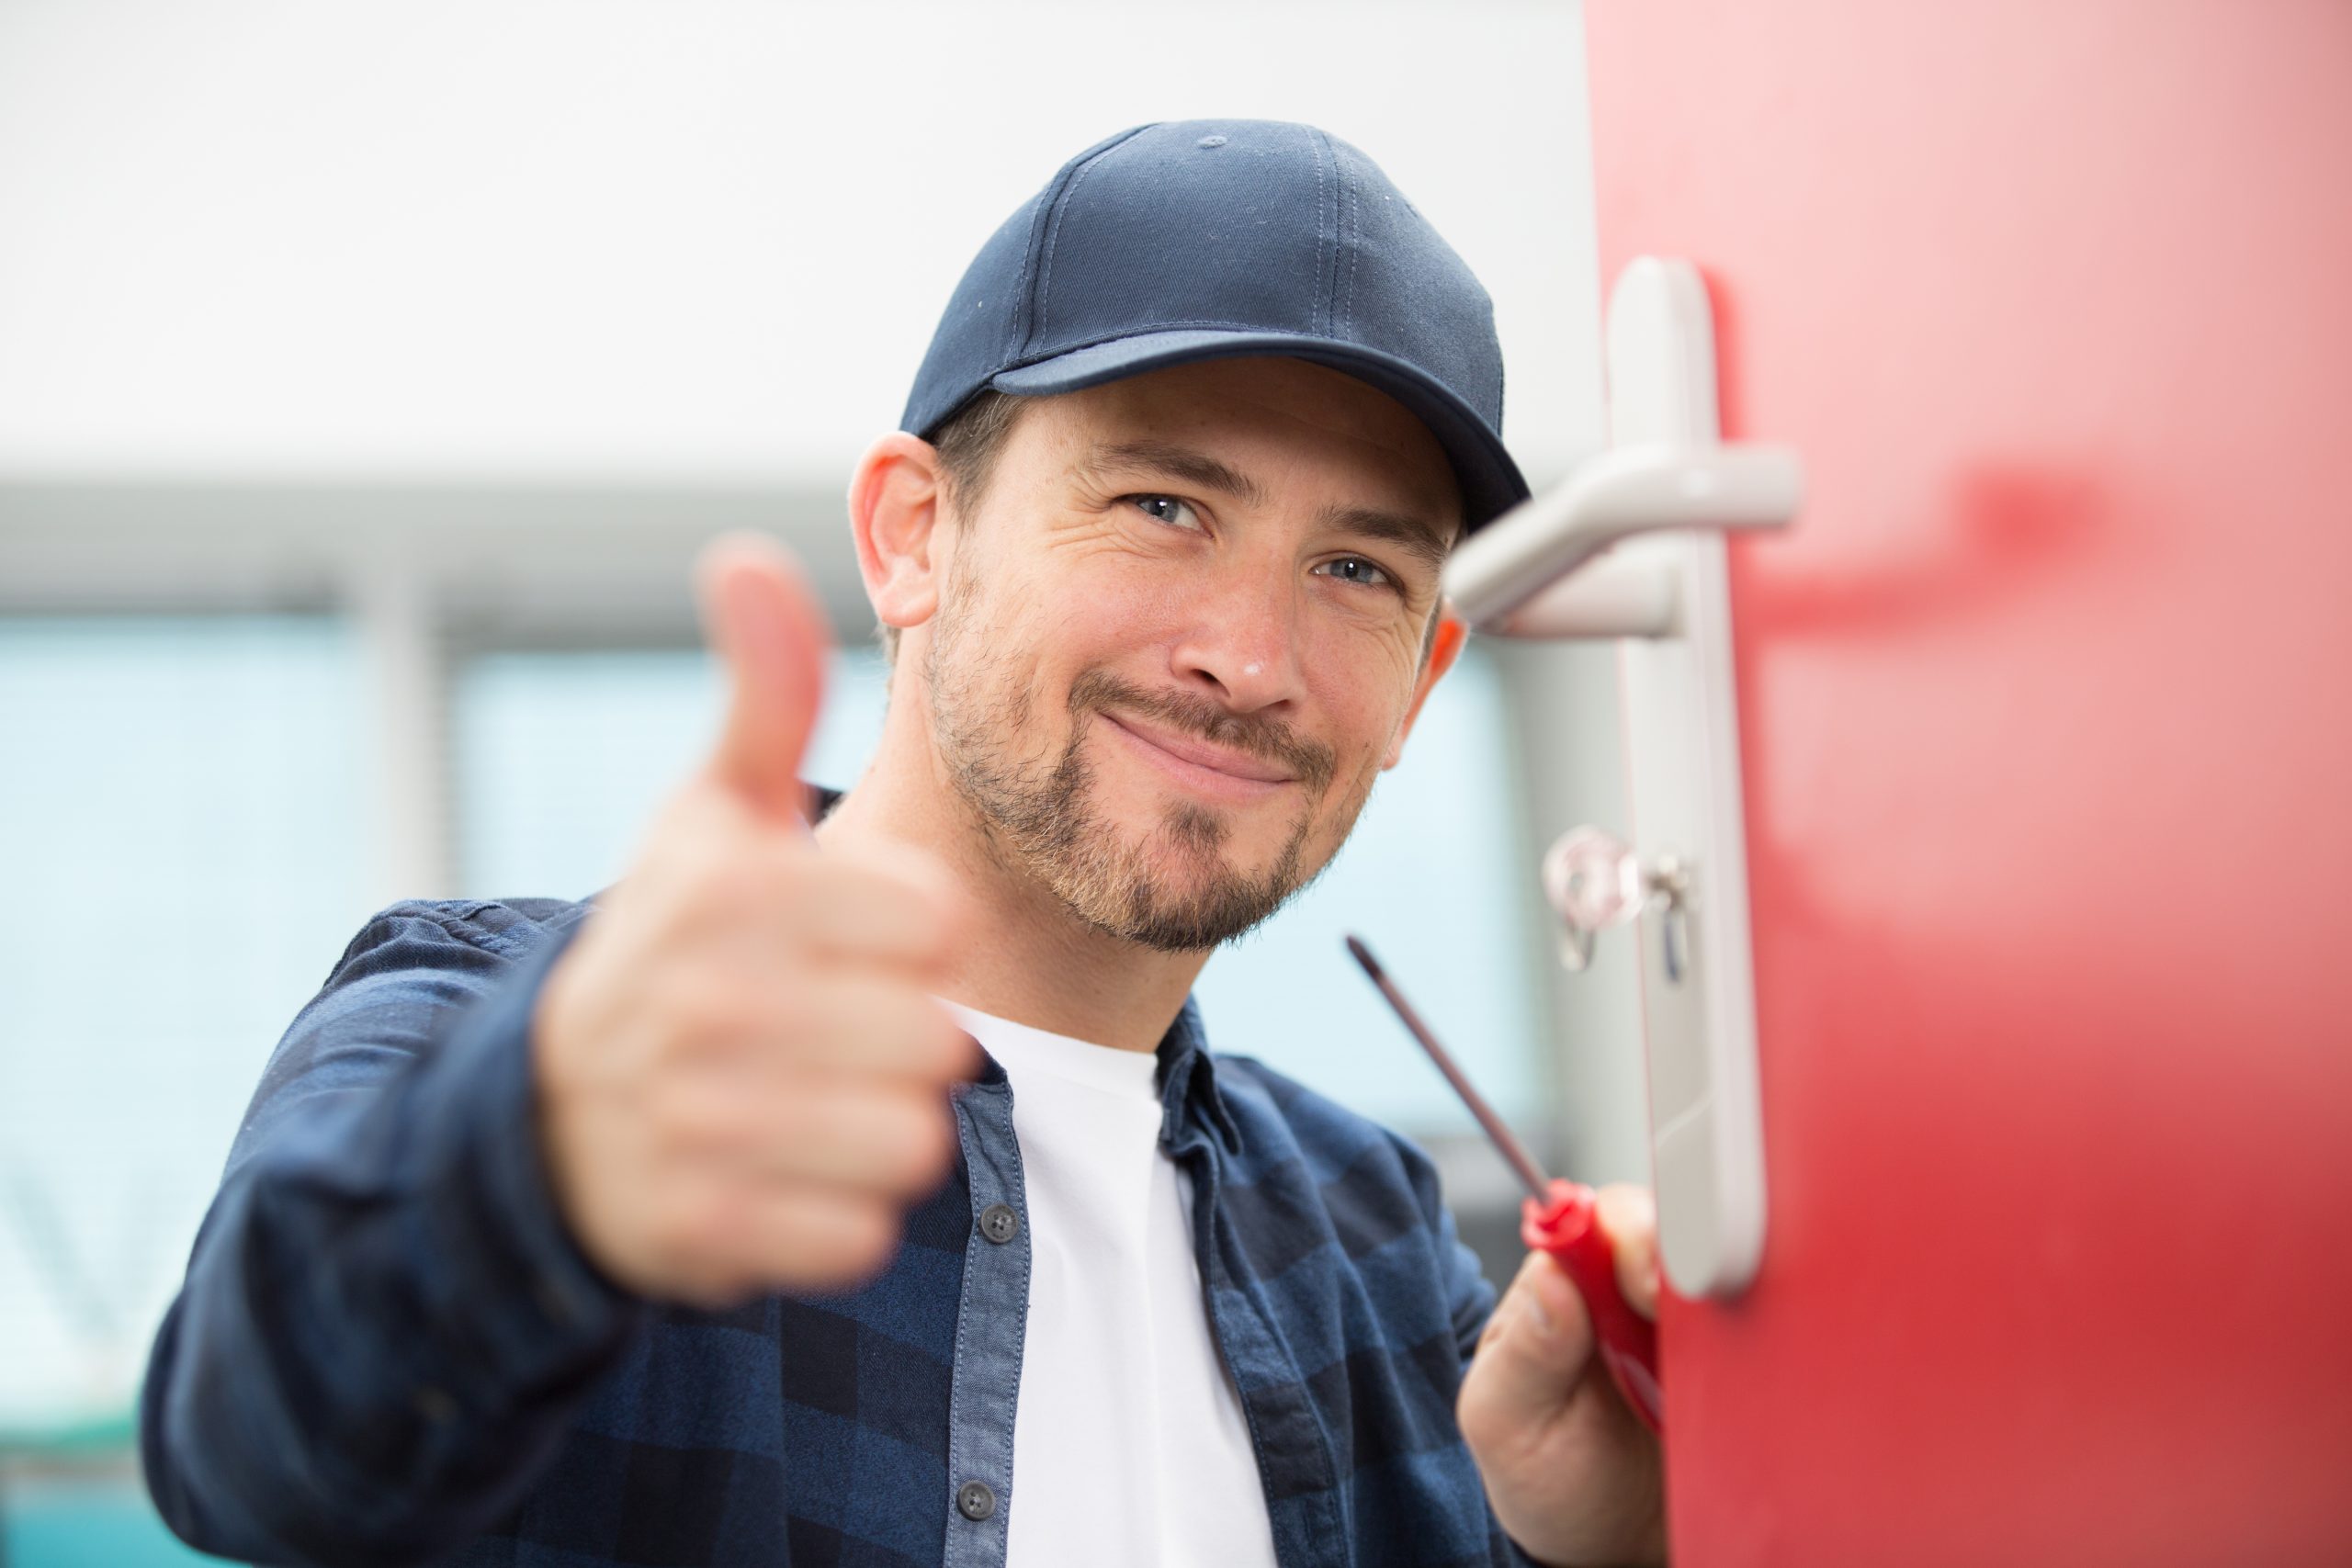 A man fixing a door and giving the thumbs up